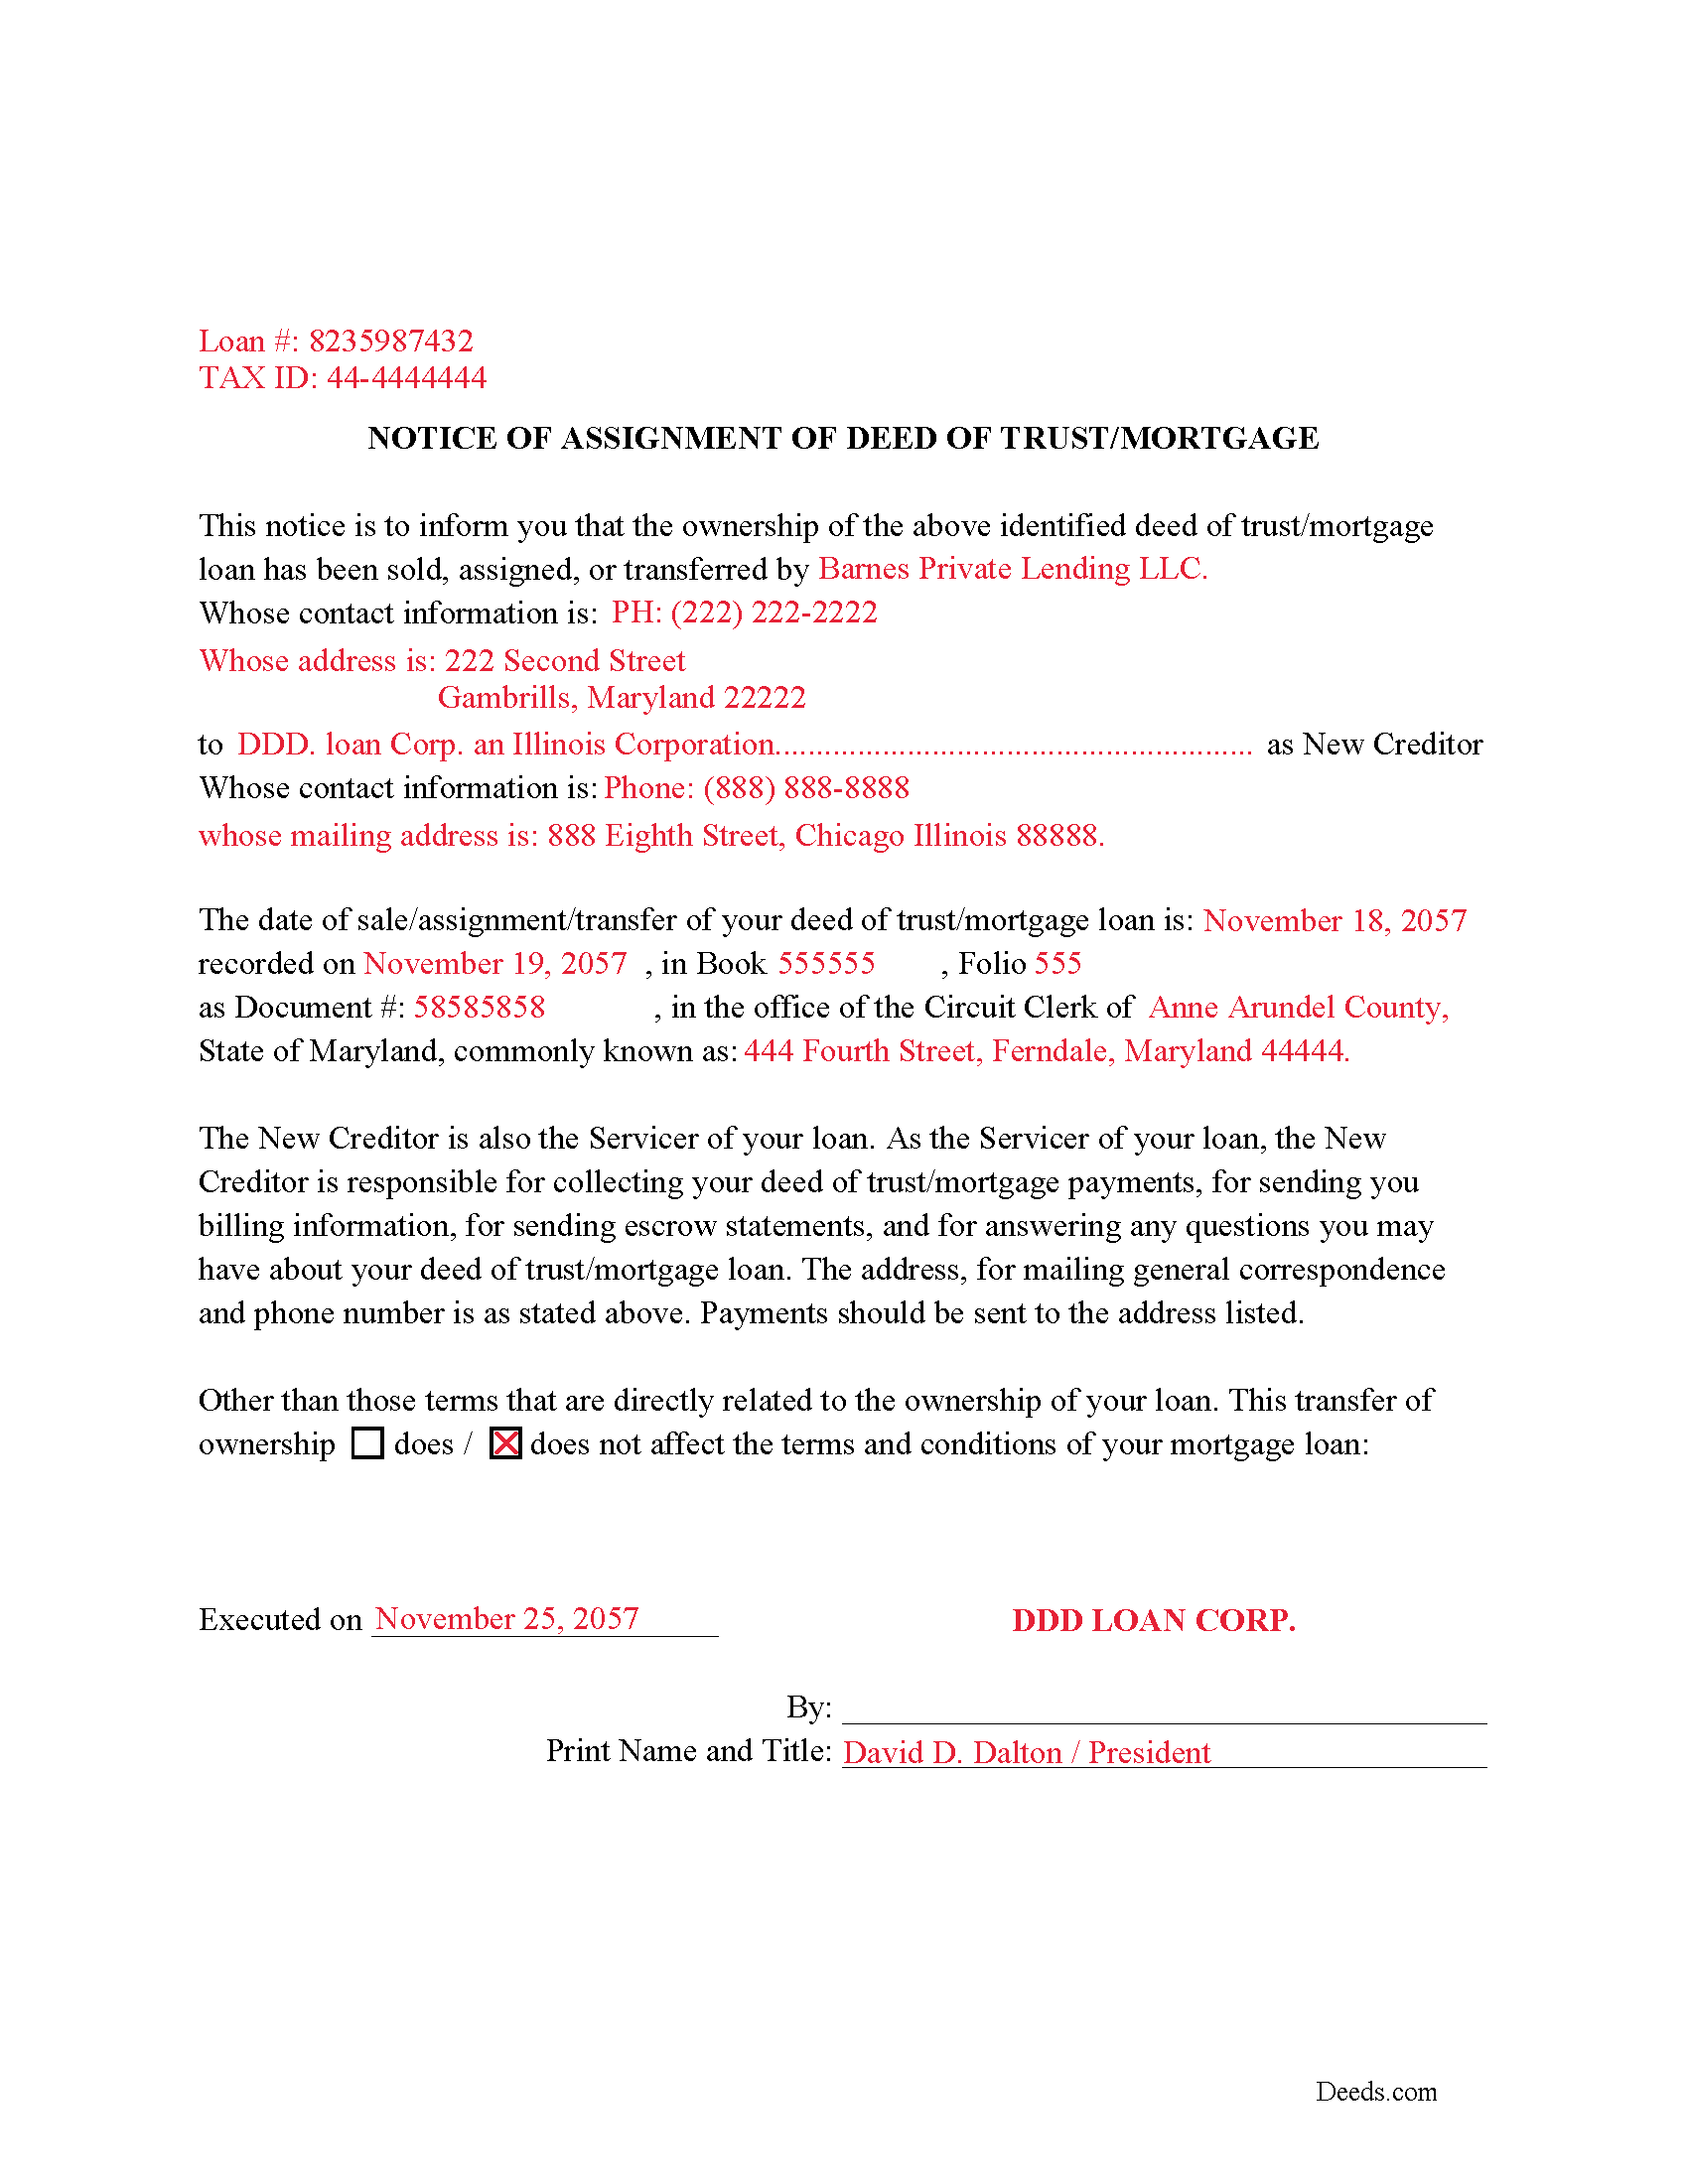 Completed Example of the Notice of Assignment Document